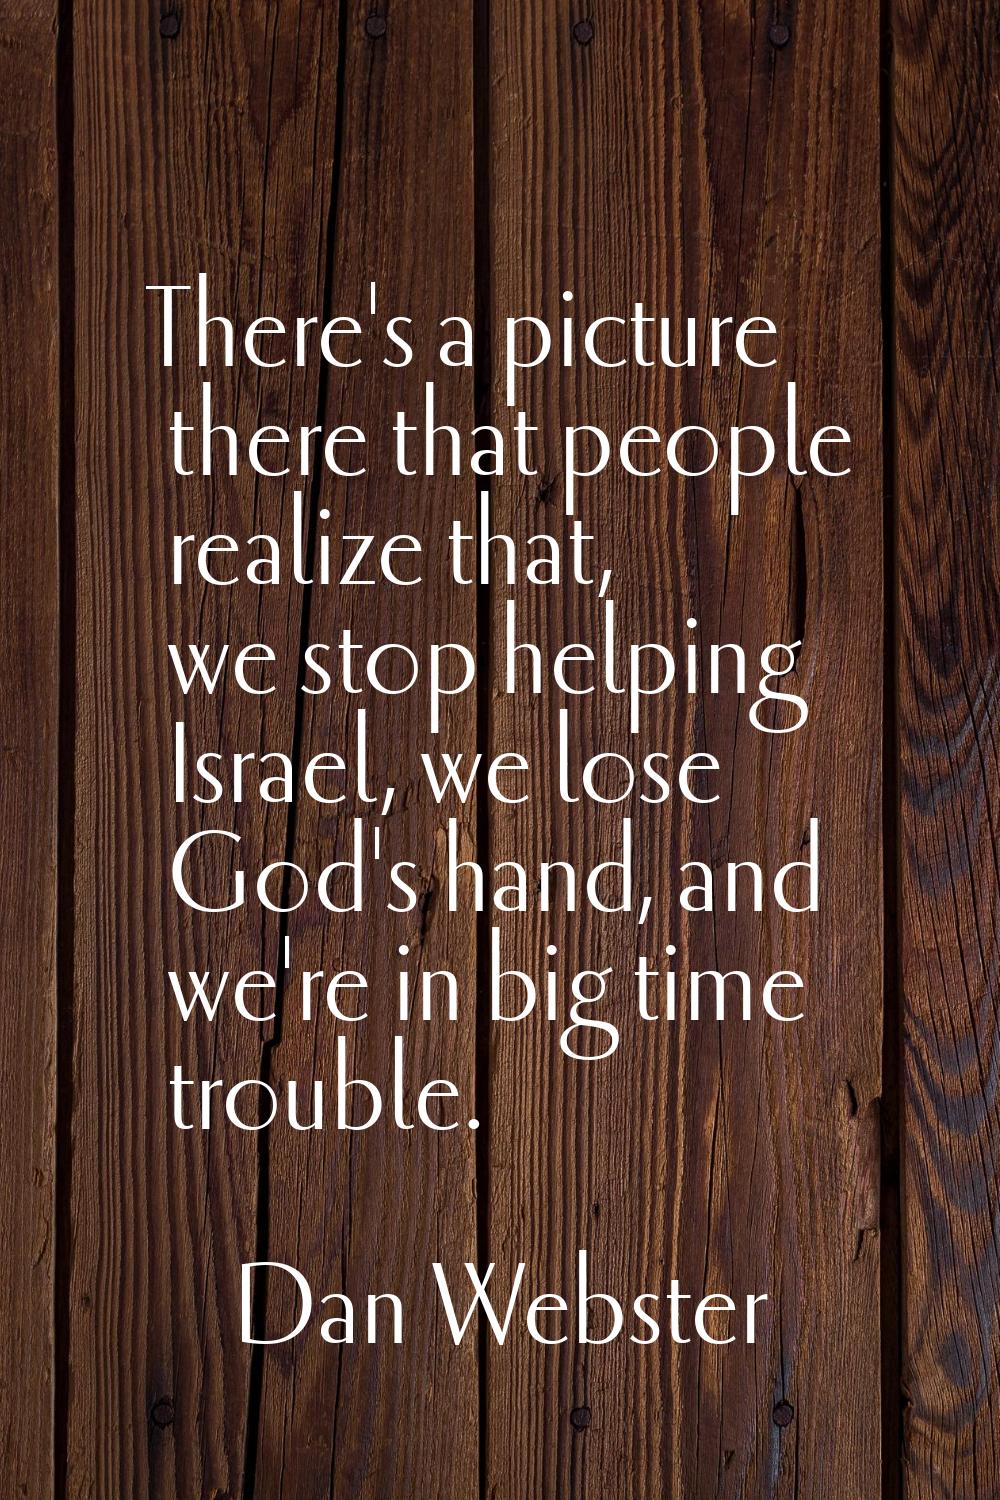 There's a picture there that people realize that, we stop helping Israel, we lose God's hand, and w